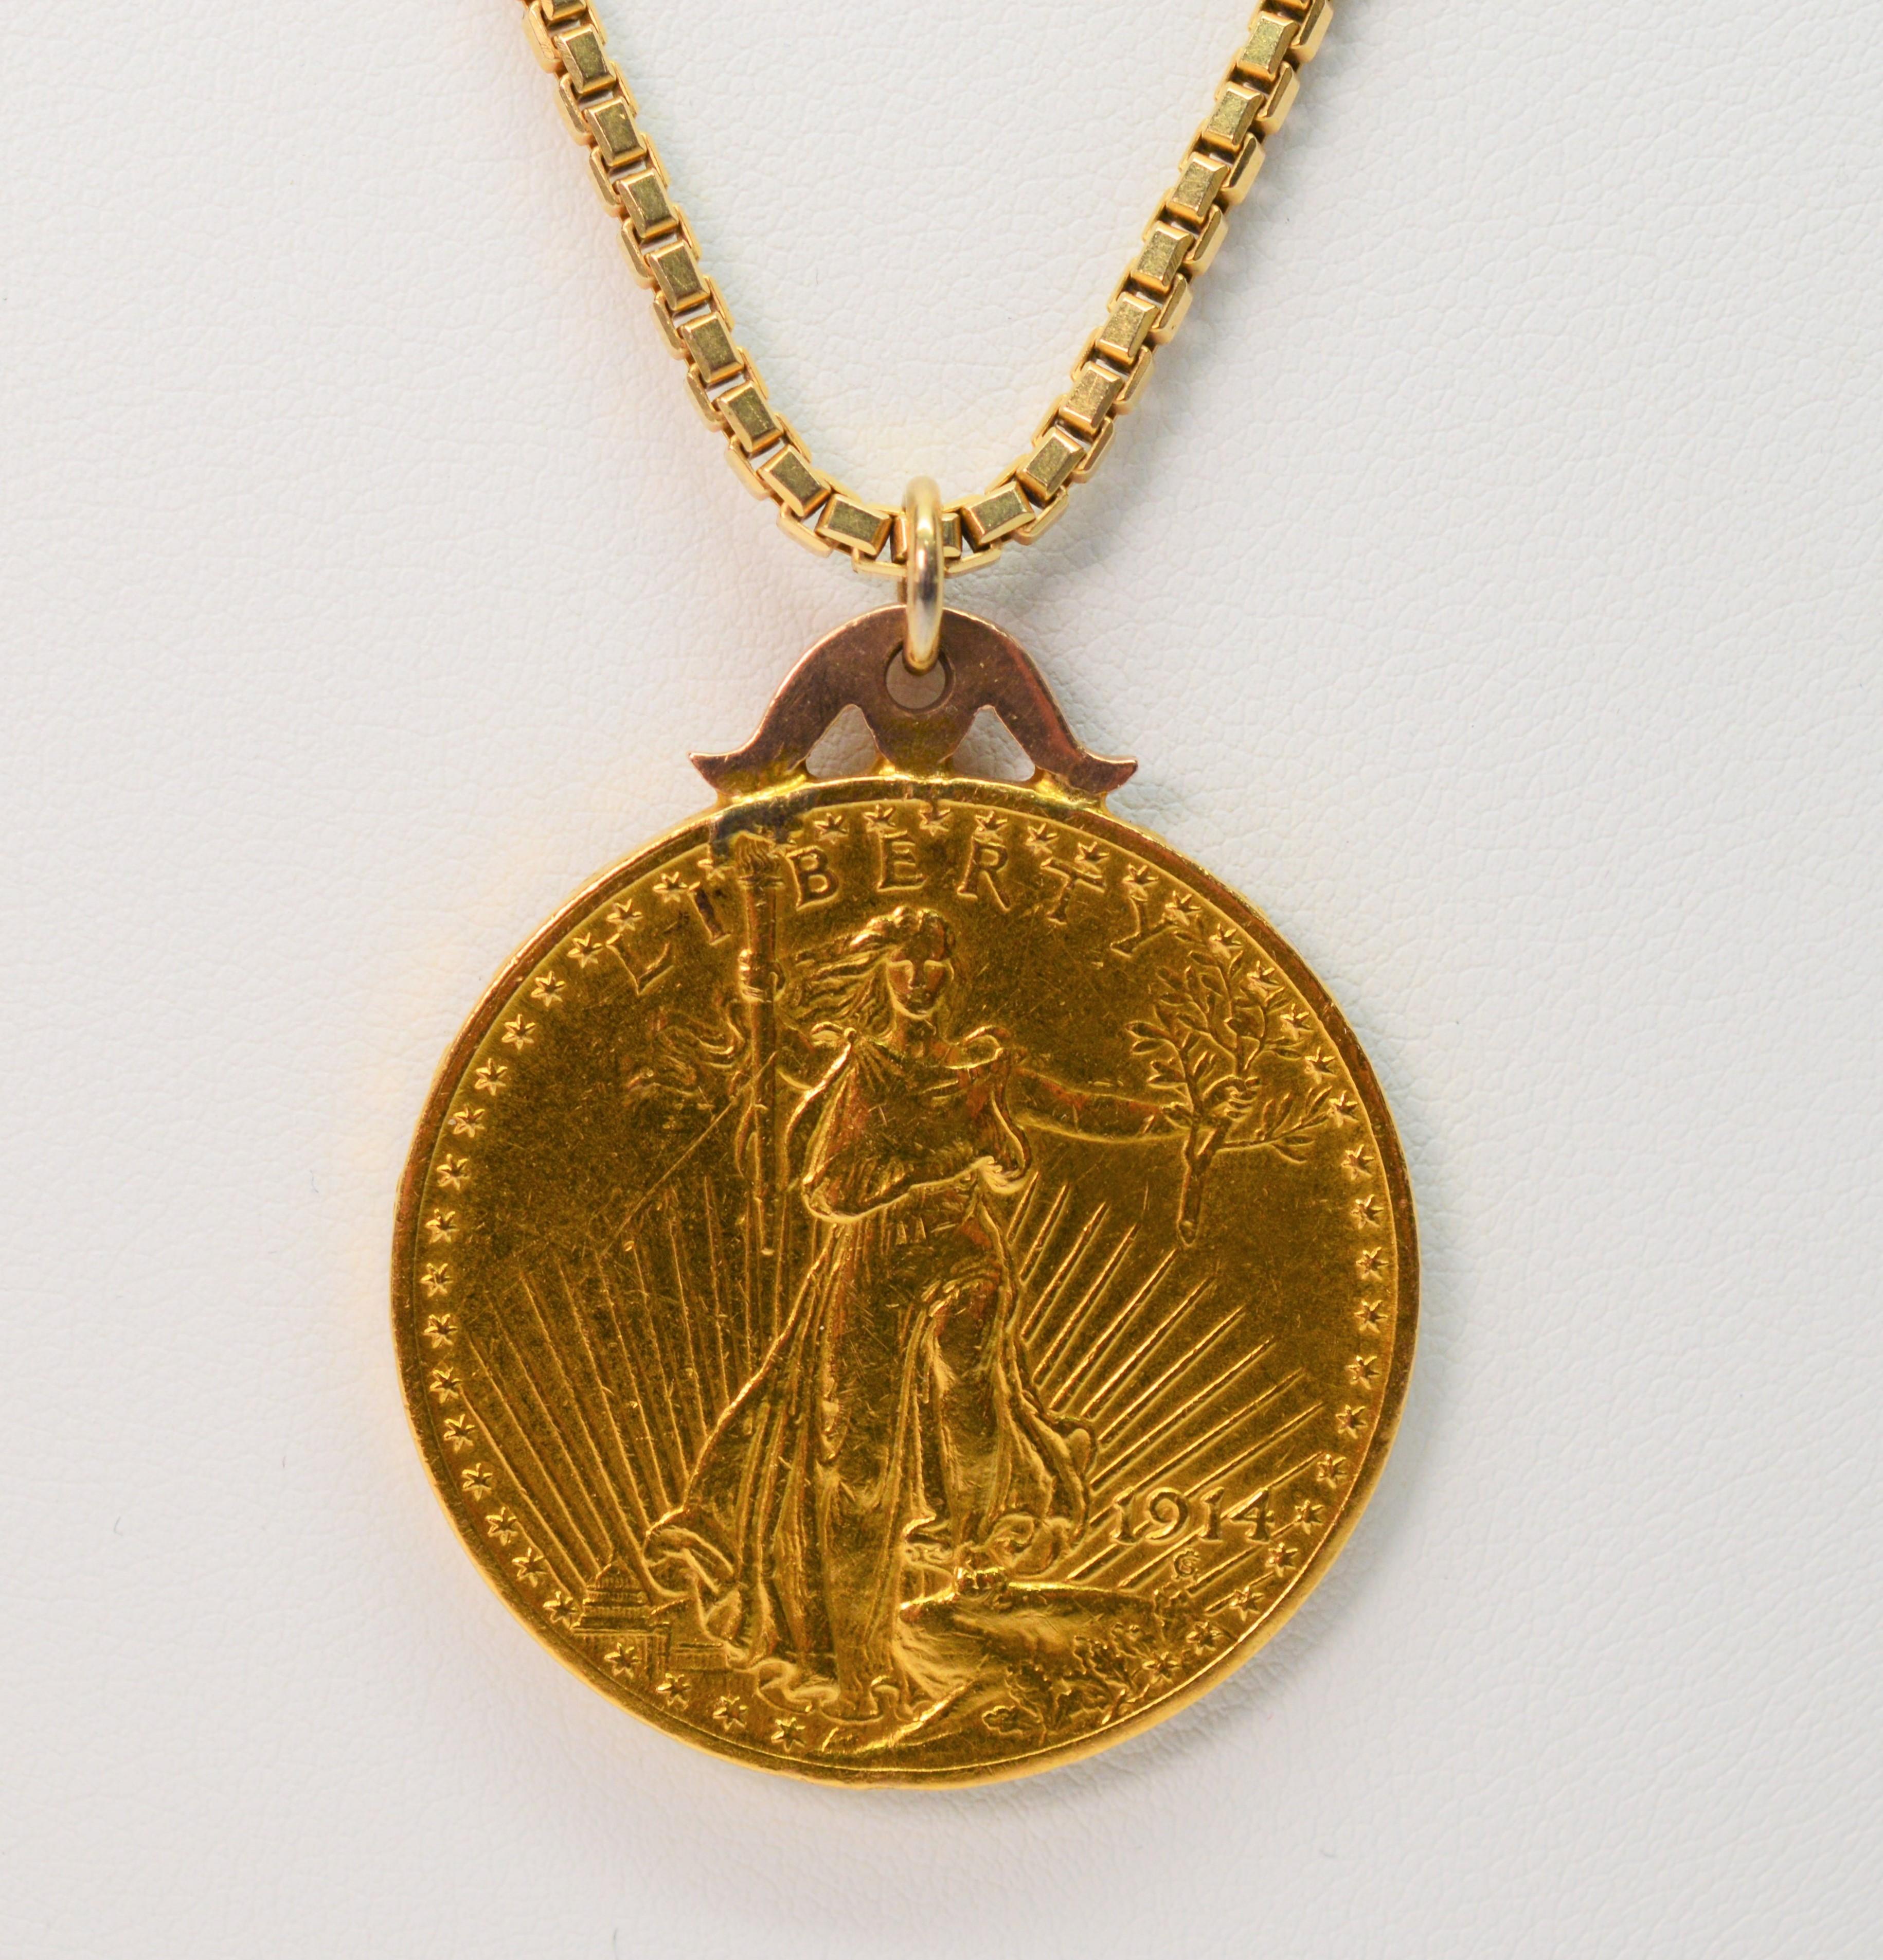 Make a bold statement in gold with this authentic genuine 1914 Saint Gauden twenty two karat 22k Gold Double Eagle Twenty Dollar American Coin pendant necklace . The twenty dollar gold piece designed by Augustus Saint-Gaudens and issued from